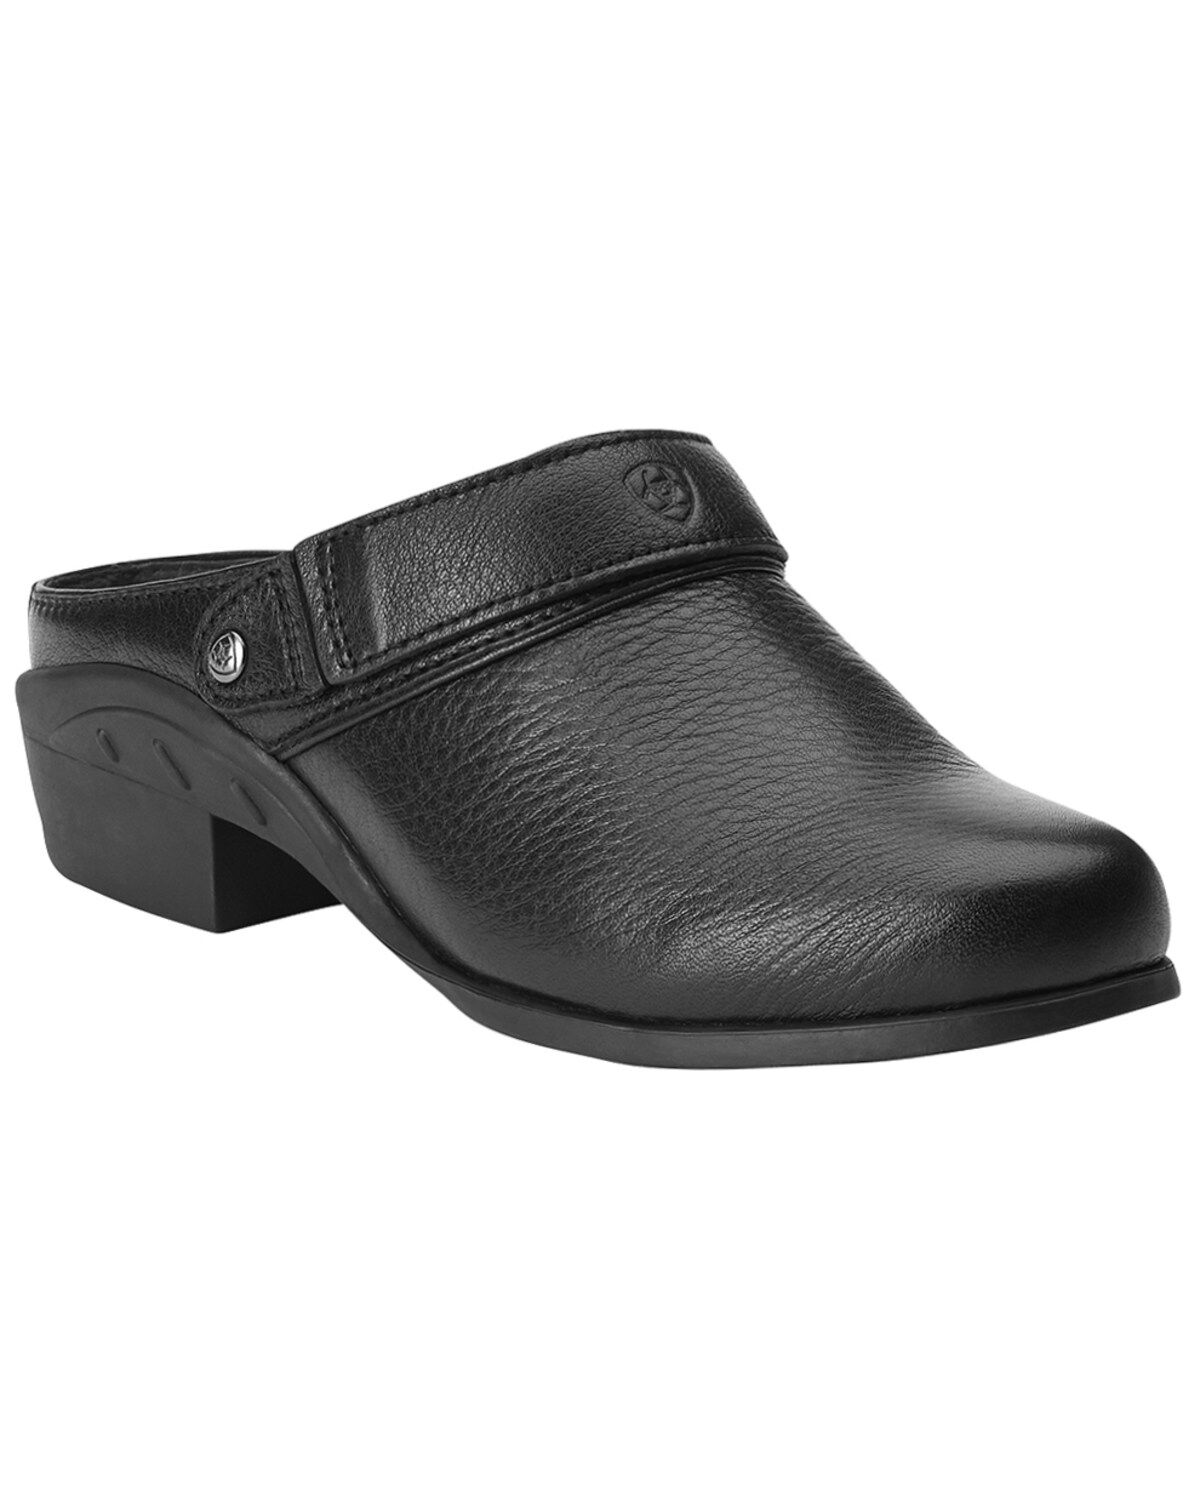 womens clogs and mules